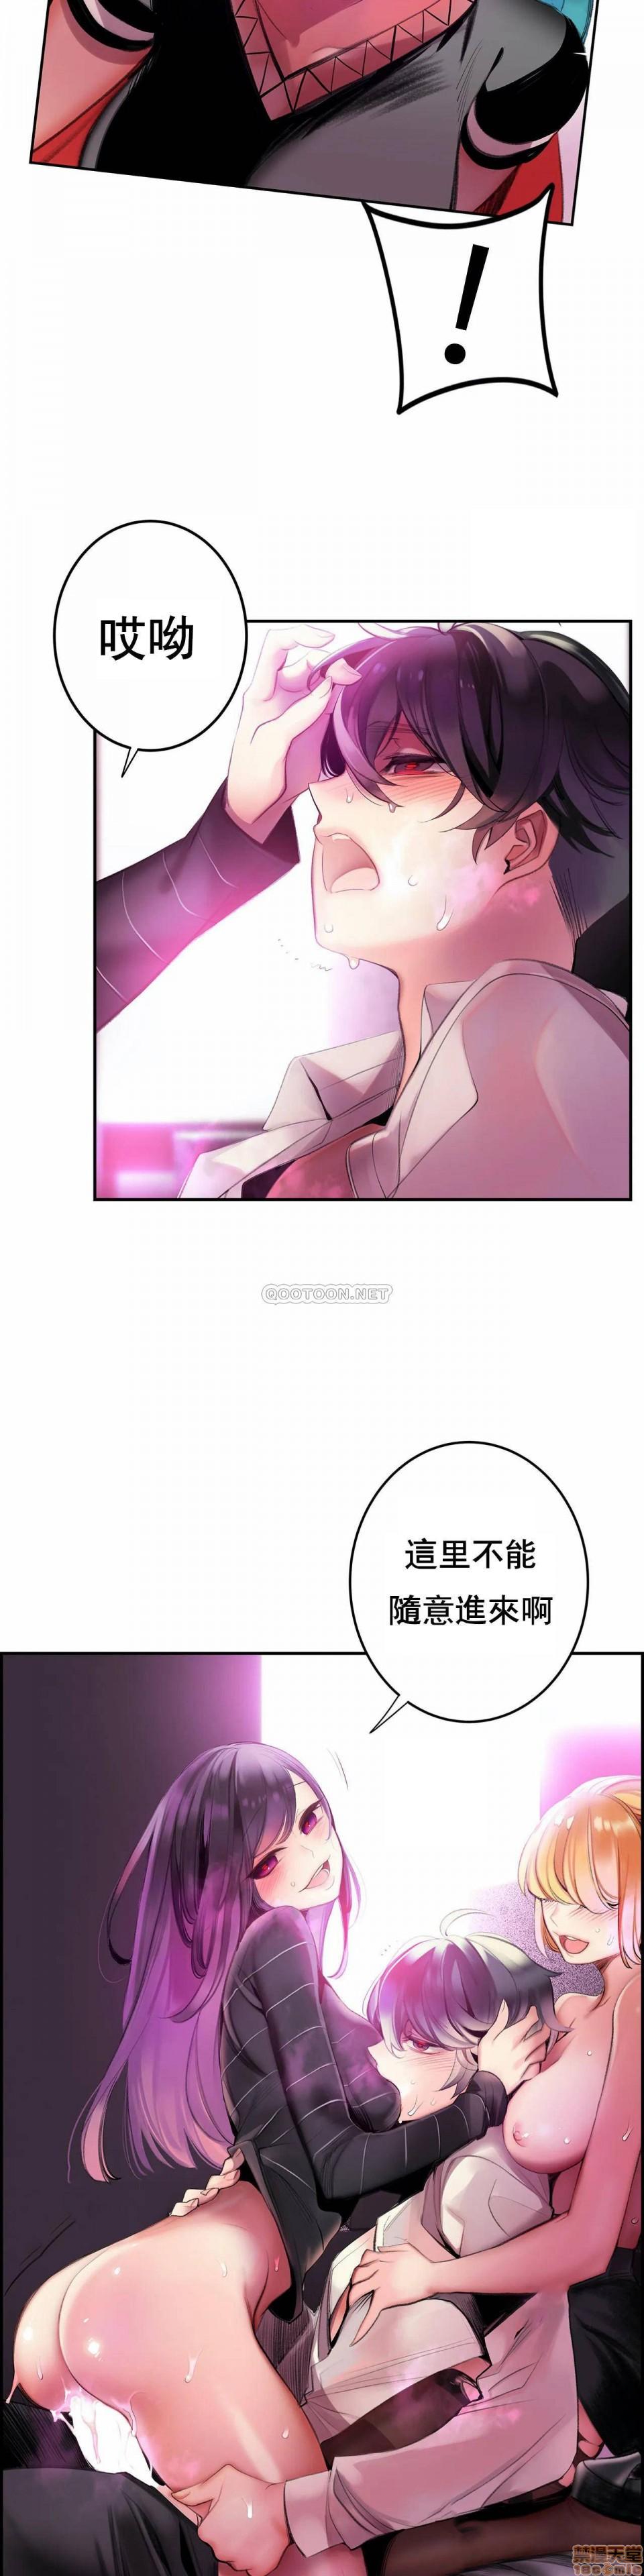 [Juder] Lilith`s Cord (第二季) Ch.77-93 end [Chinese] 175